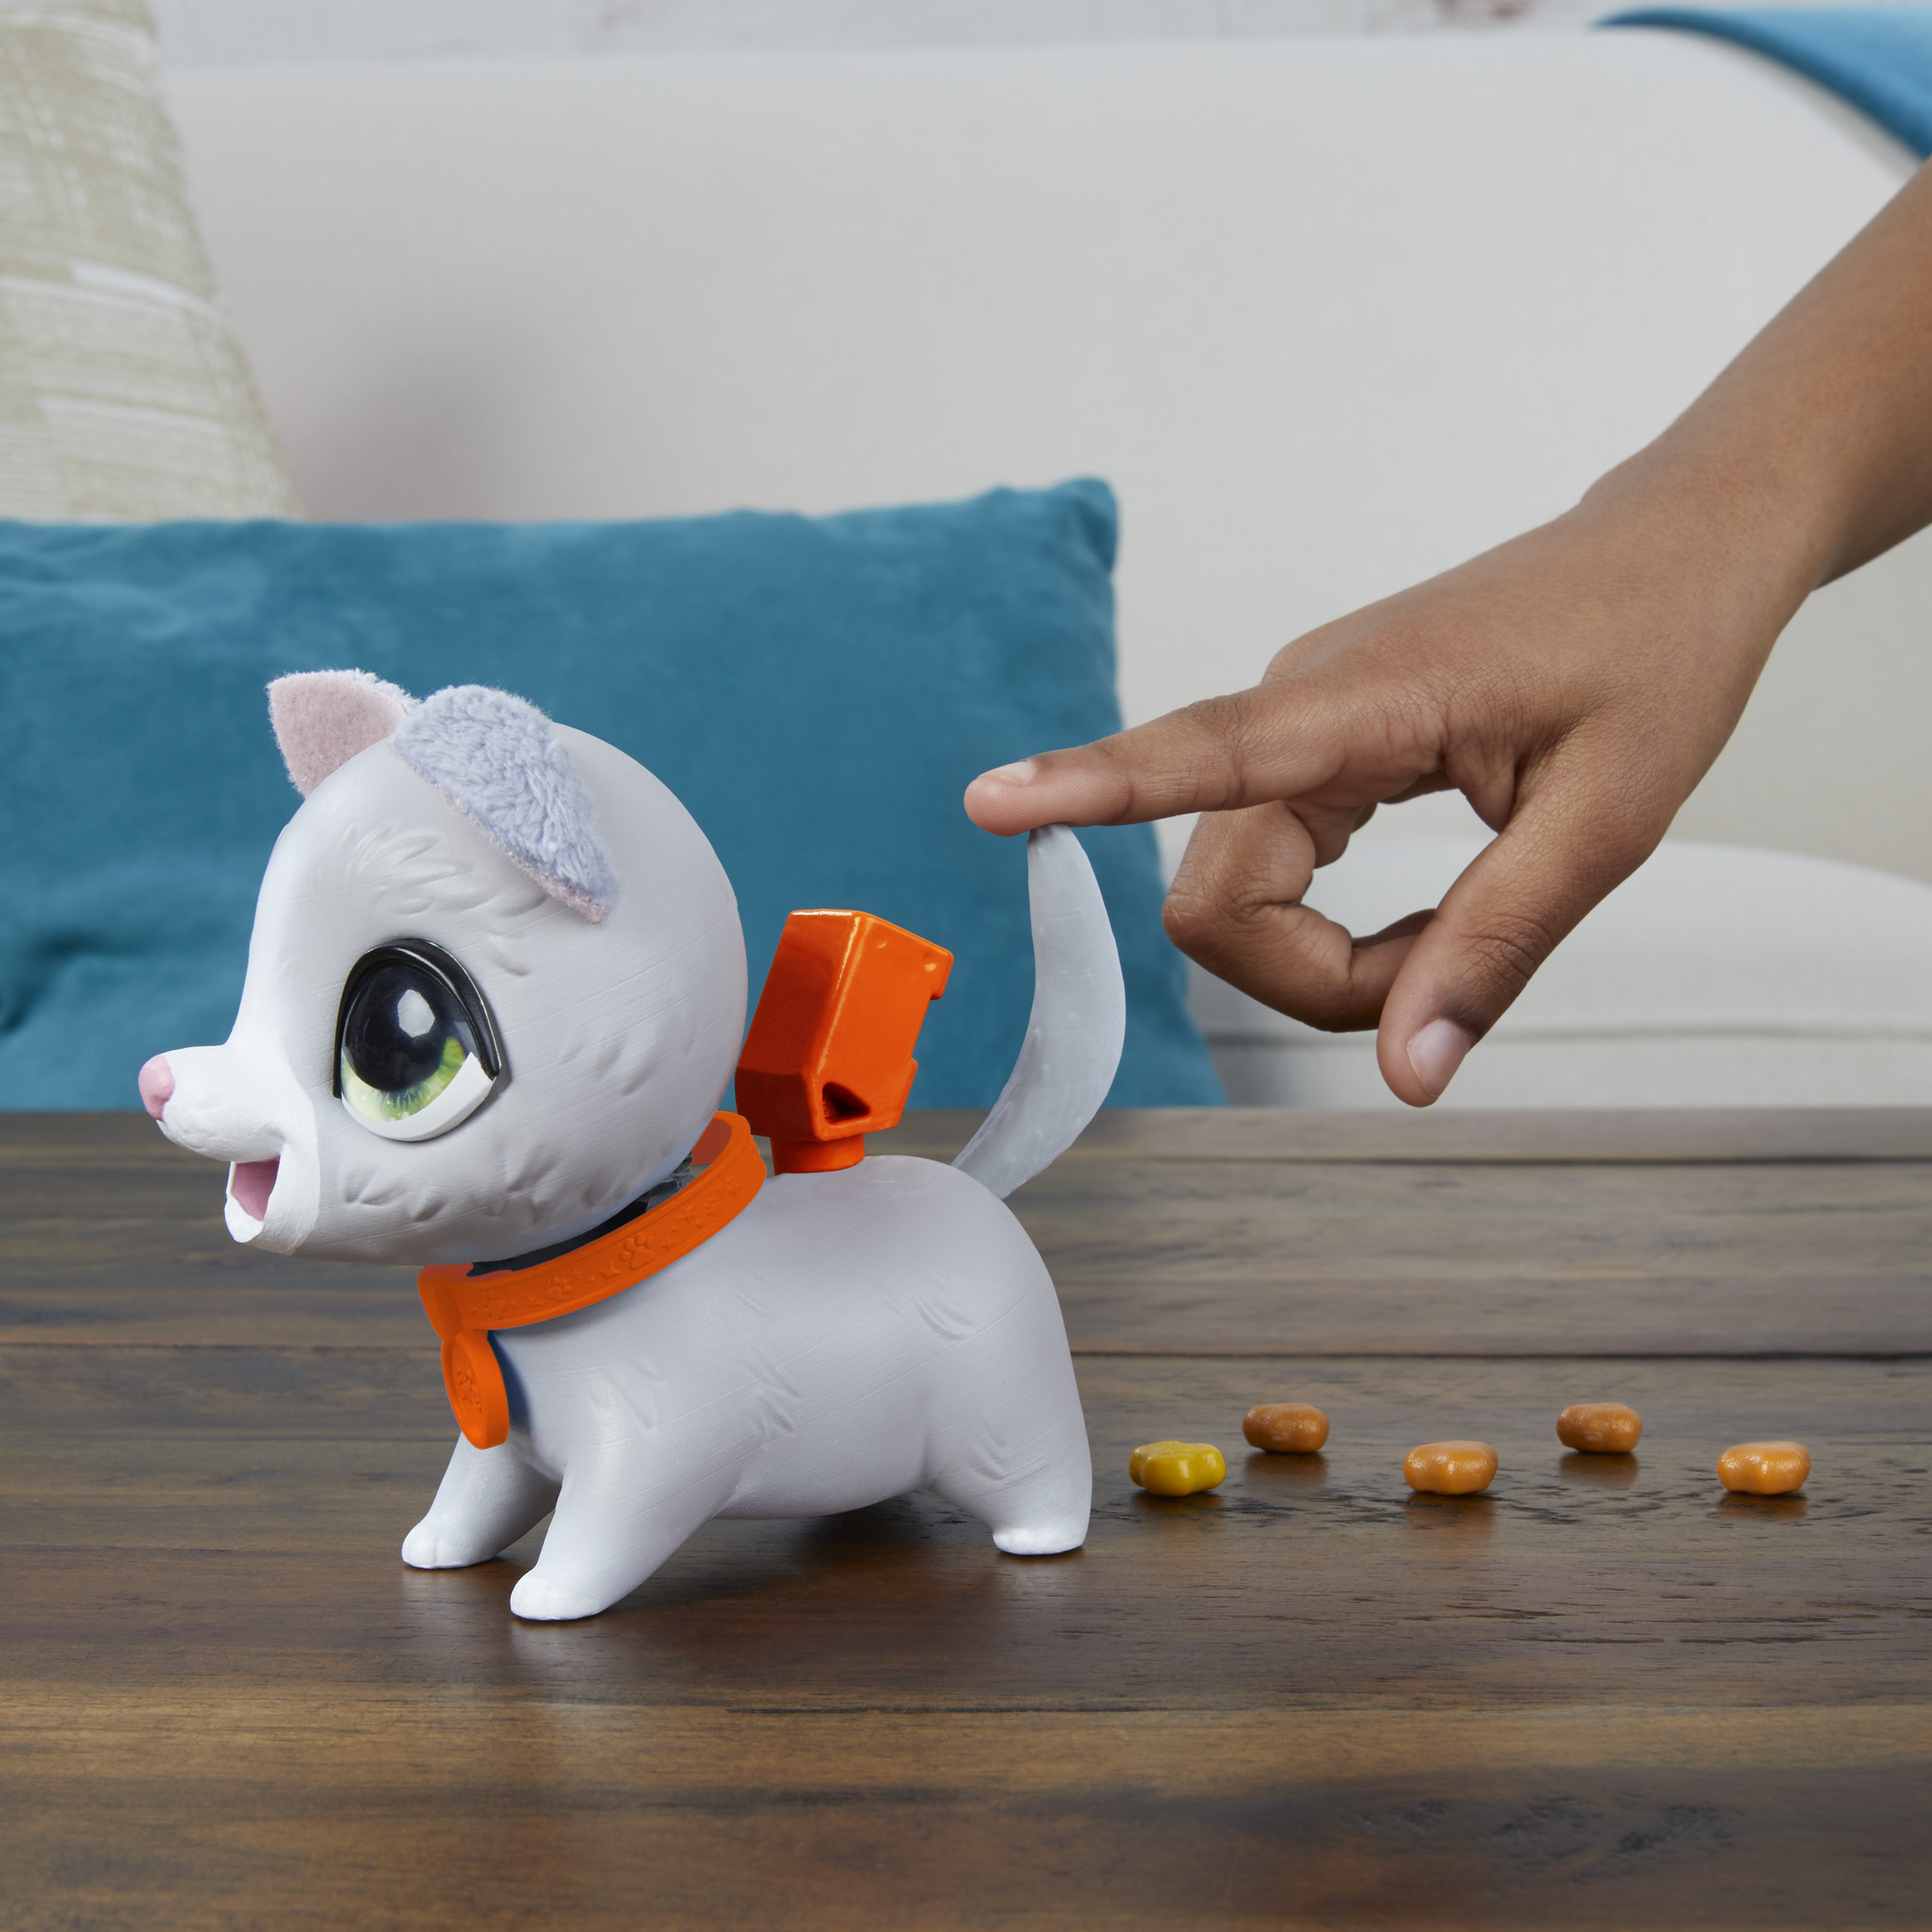 furReal Poopalots Lil’ Wags Interactive Pet Toy (Kitty) - image 4 of 6